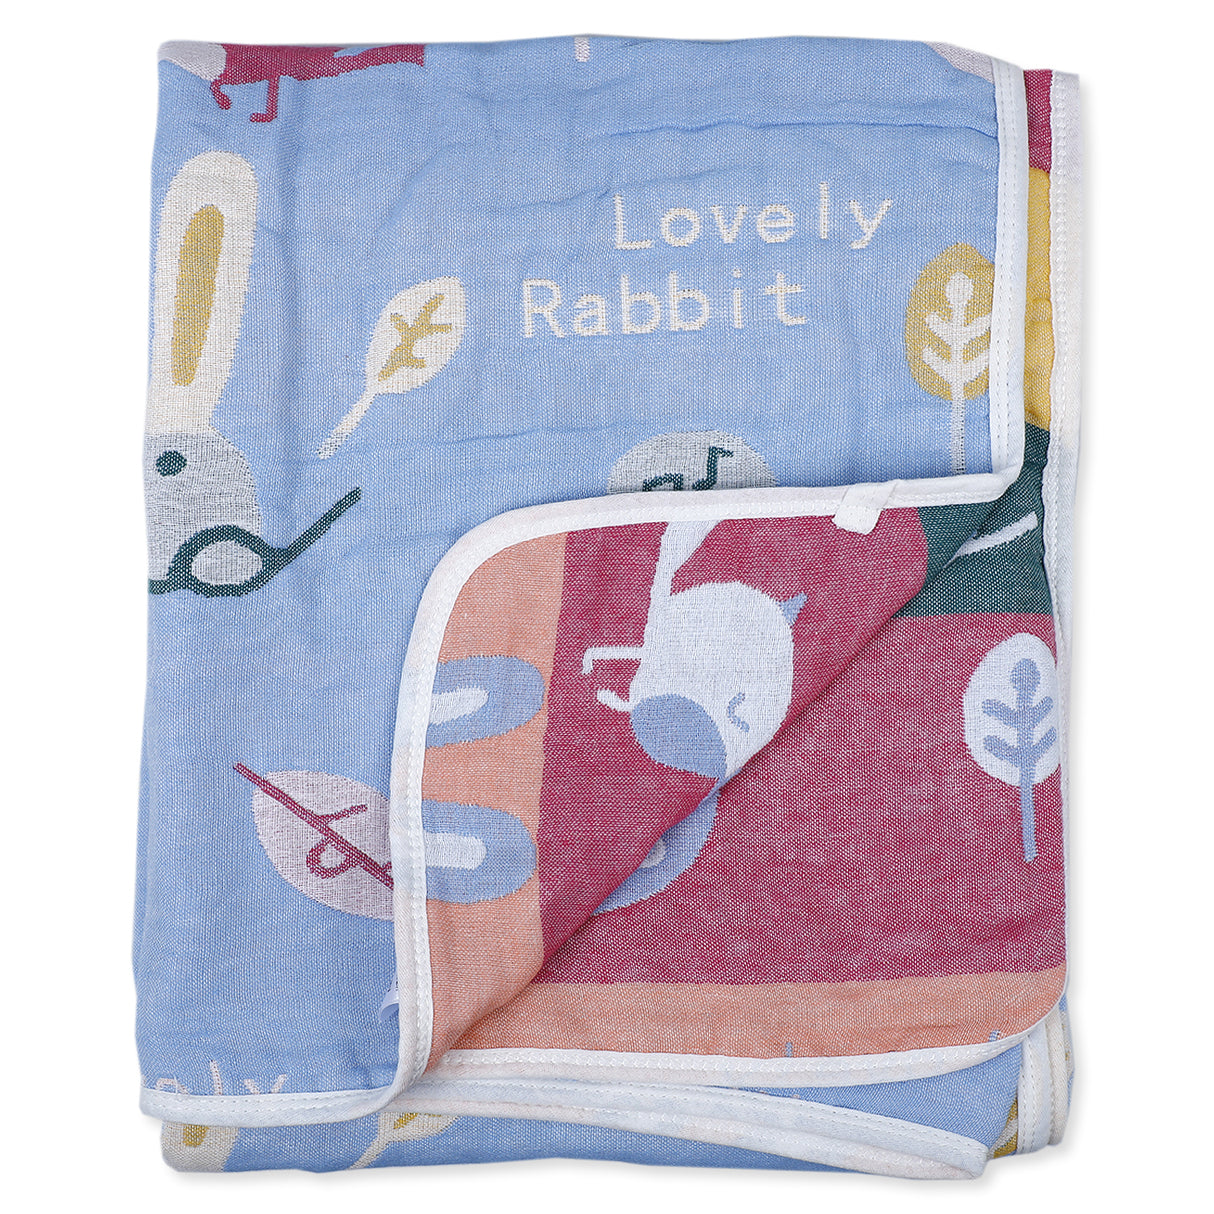 Bunny Soft And Cozy Muslin Cotton Blanket